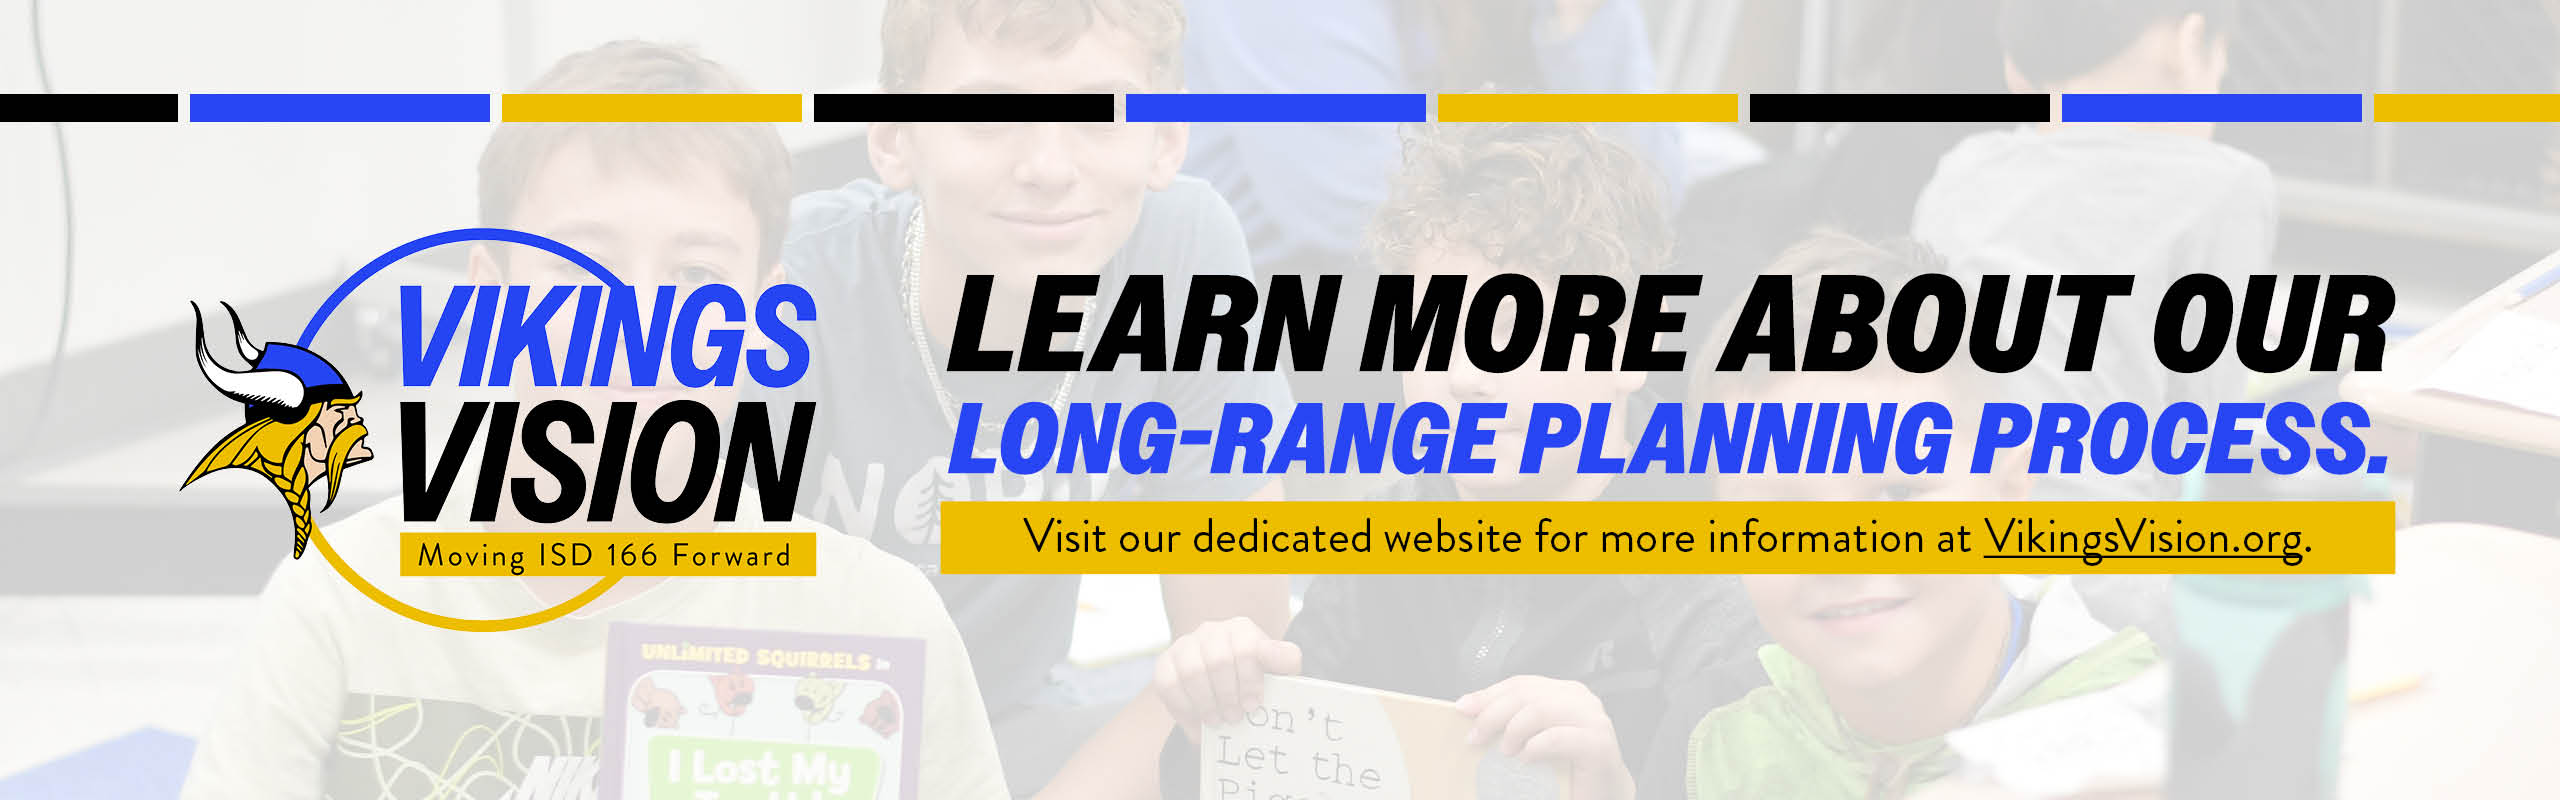 Learn more about our long range planning process